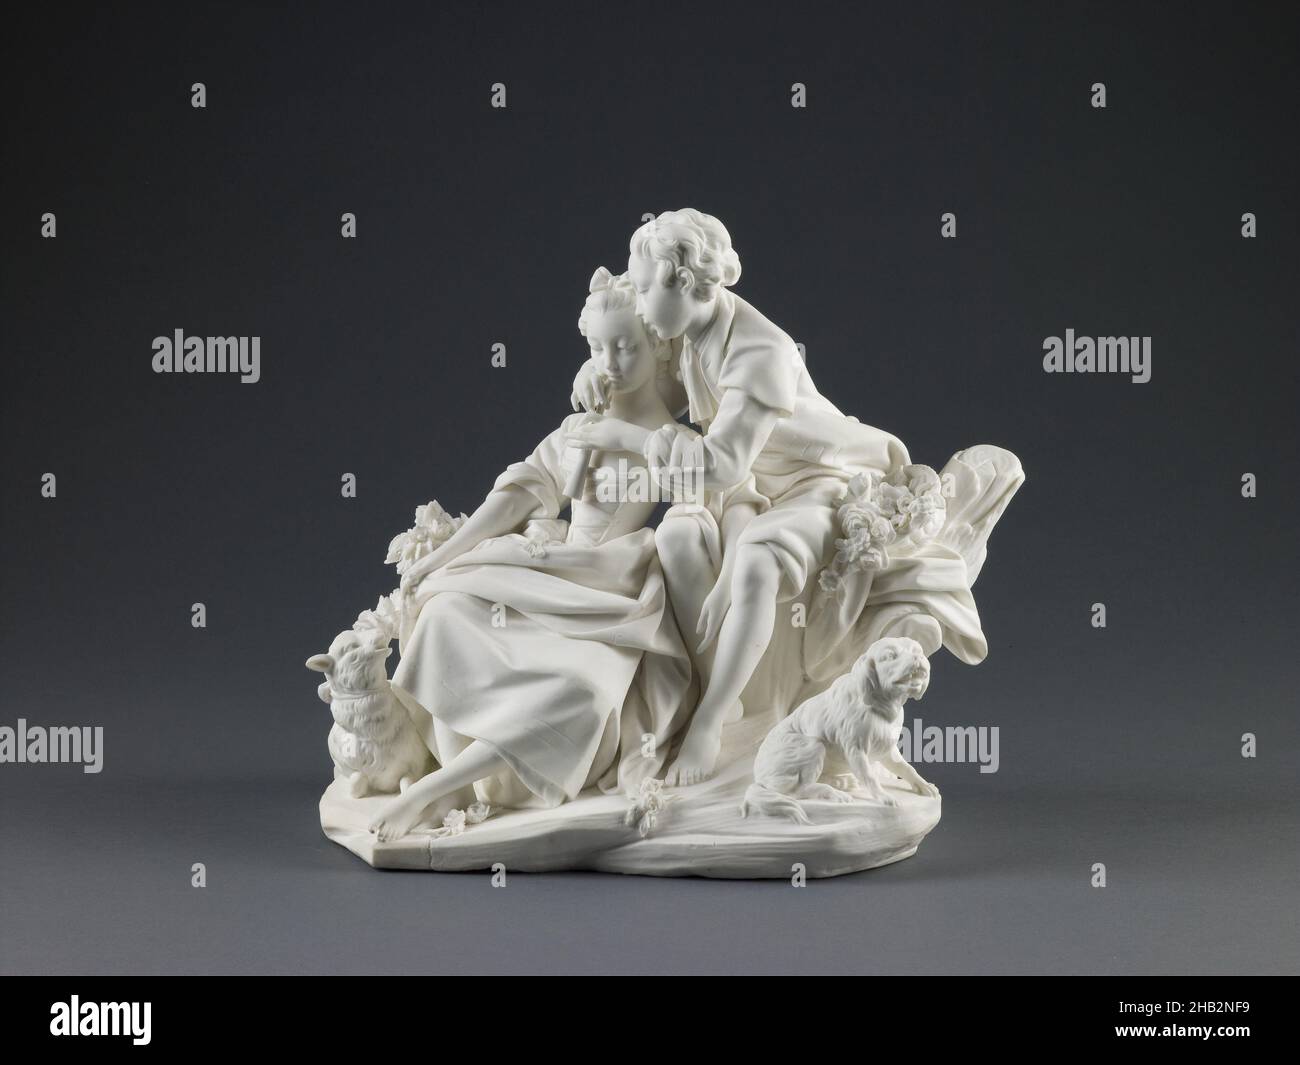 The Flute Lesson, François Boucher, French, 1703–1770, Sèvres Porcelain Factory, France, founded 1756, 1757–66, Porcelain, Made in Sèvres, France, Europe, Ceramics, 8 3/4 x 9 1/2 x 5 1/2 in. (22.2 x 24.1 x 14 cm Stock Photo